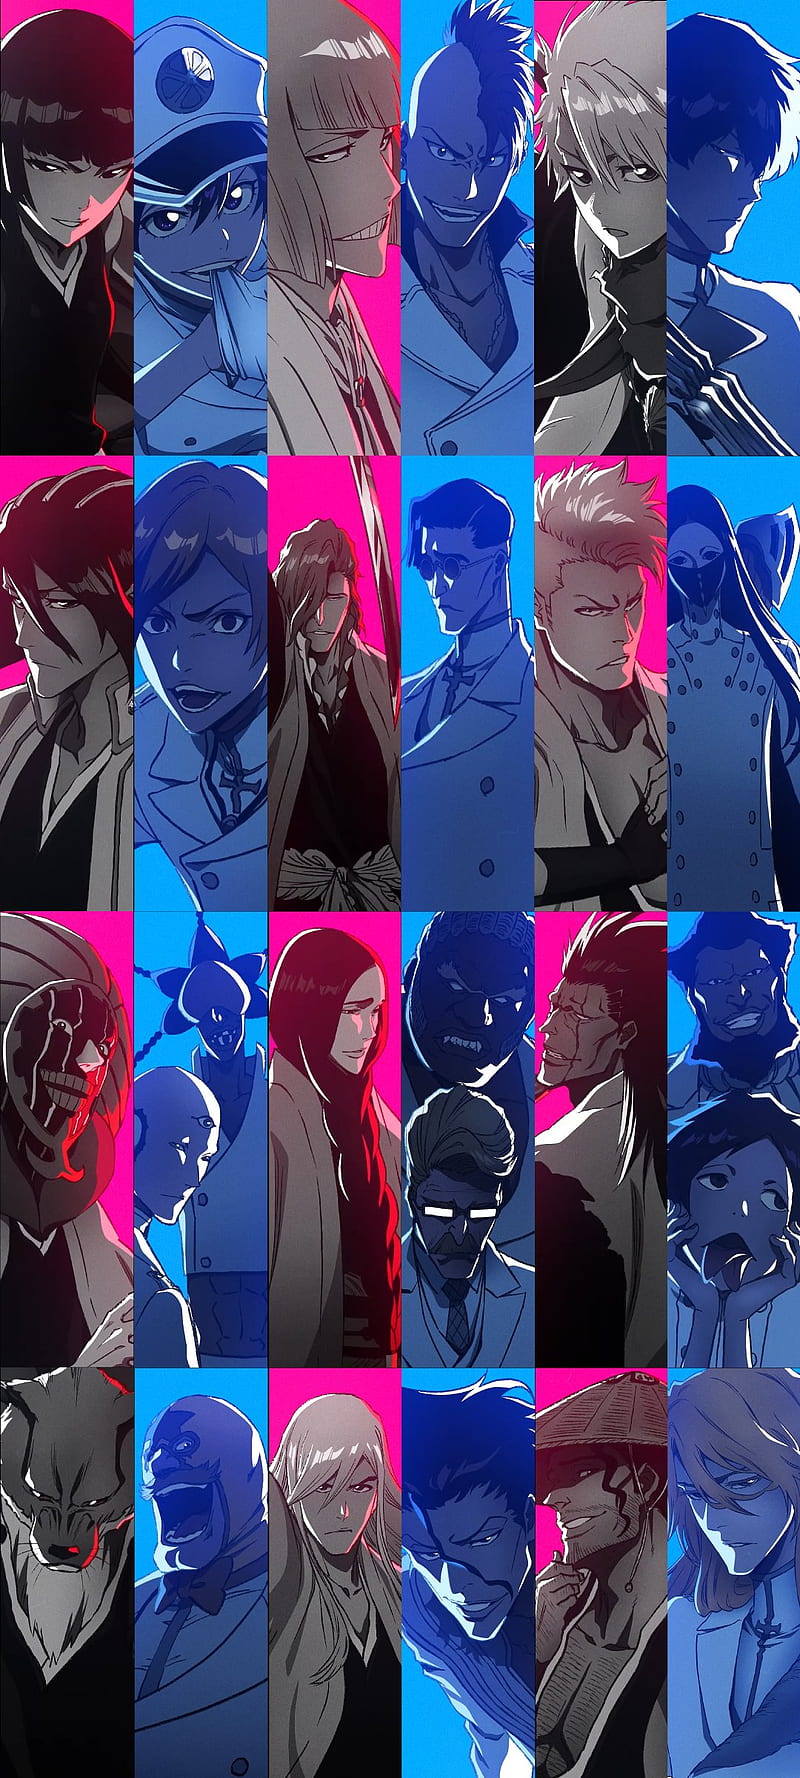 Bleach: Thousand-Year Blood War Reveals New Color Key Visual